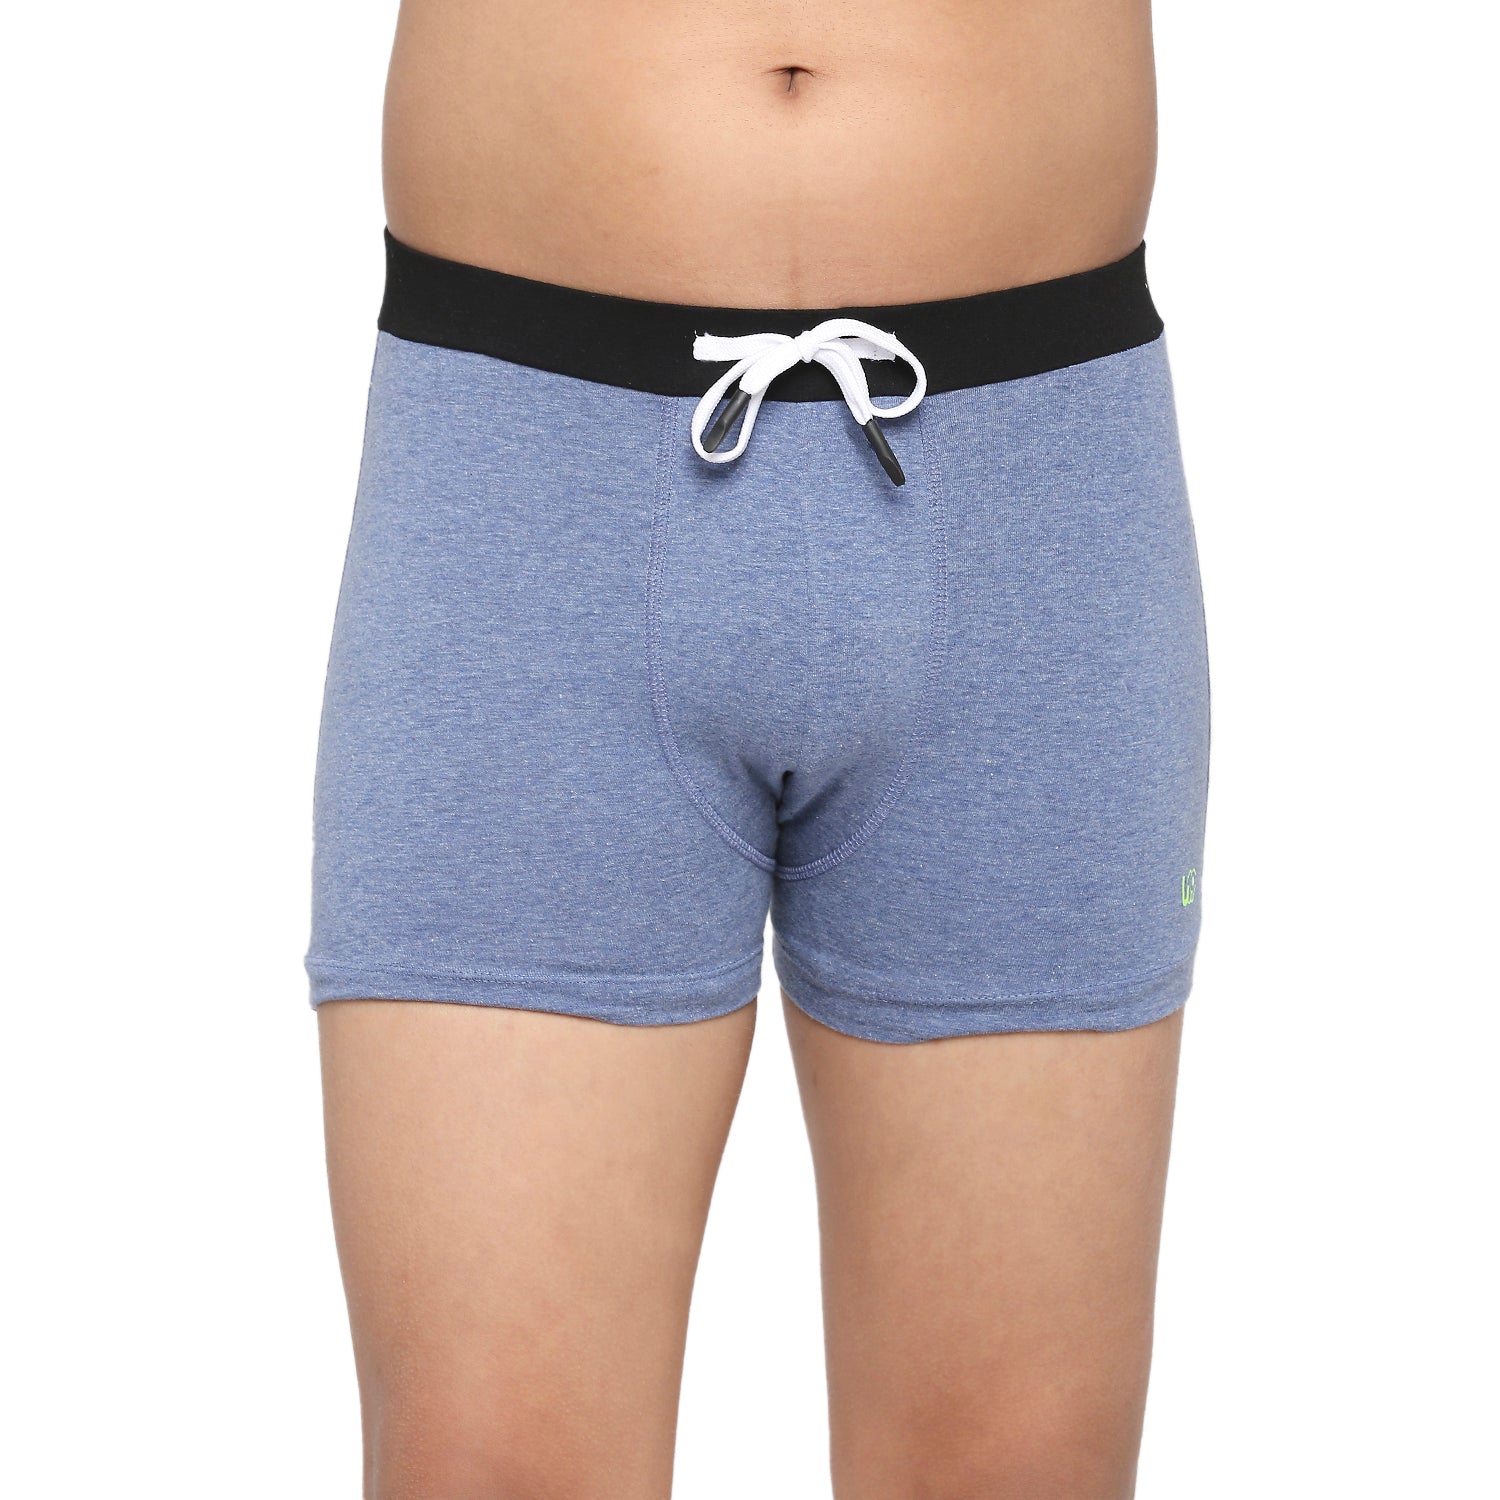 FRENCHIE Teenagers Cotton Trunk Light Gray and Blue - Pack of 2